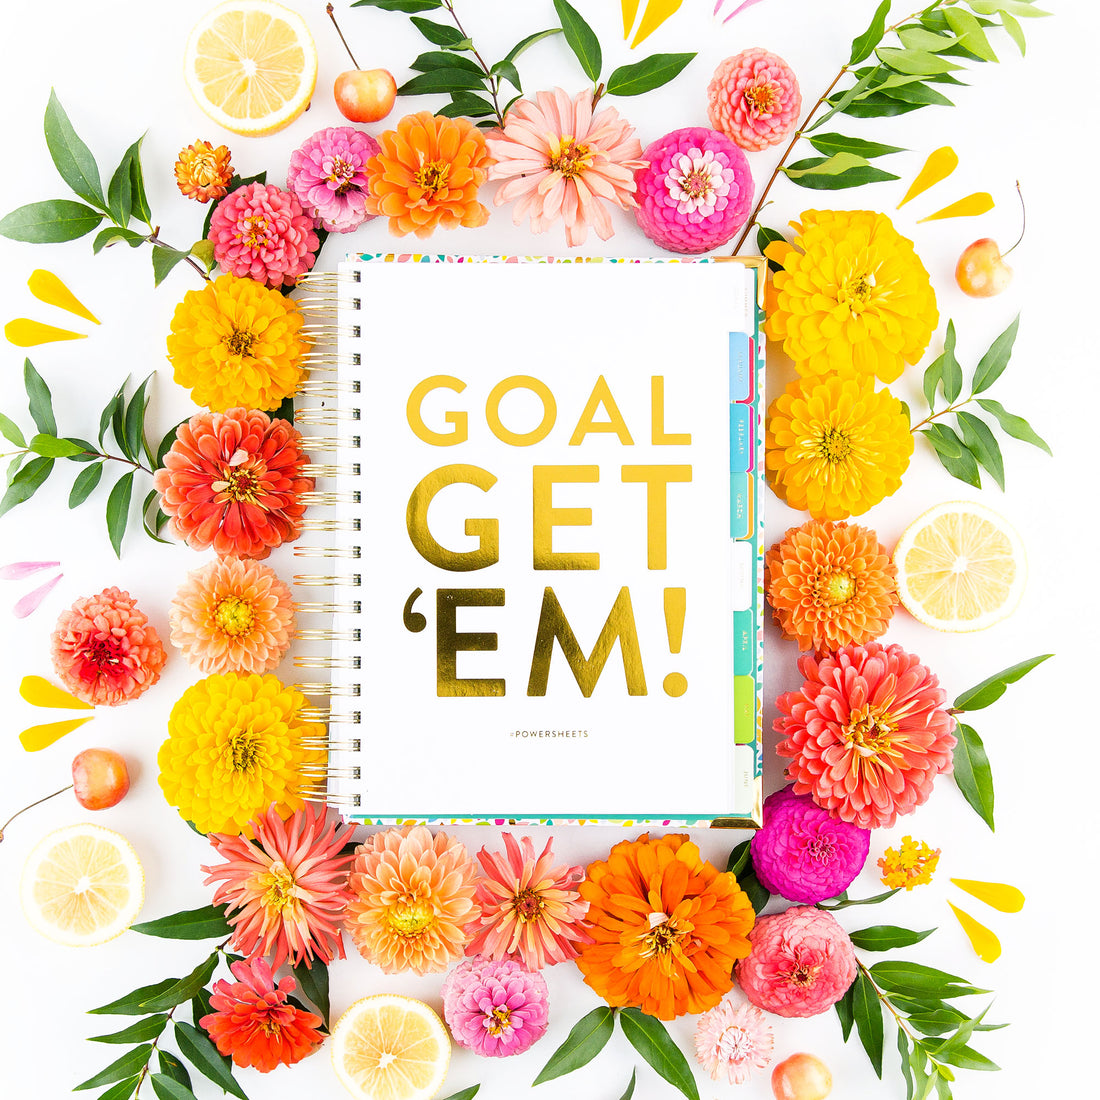 How to Get Started on a Health and Wellness Goal